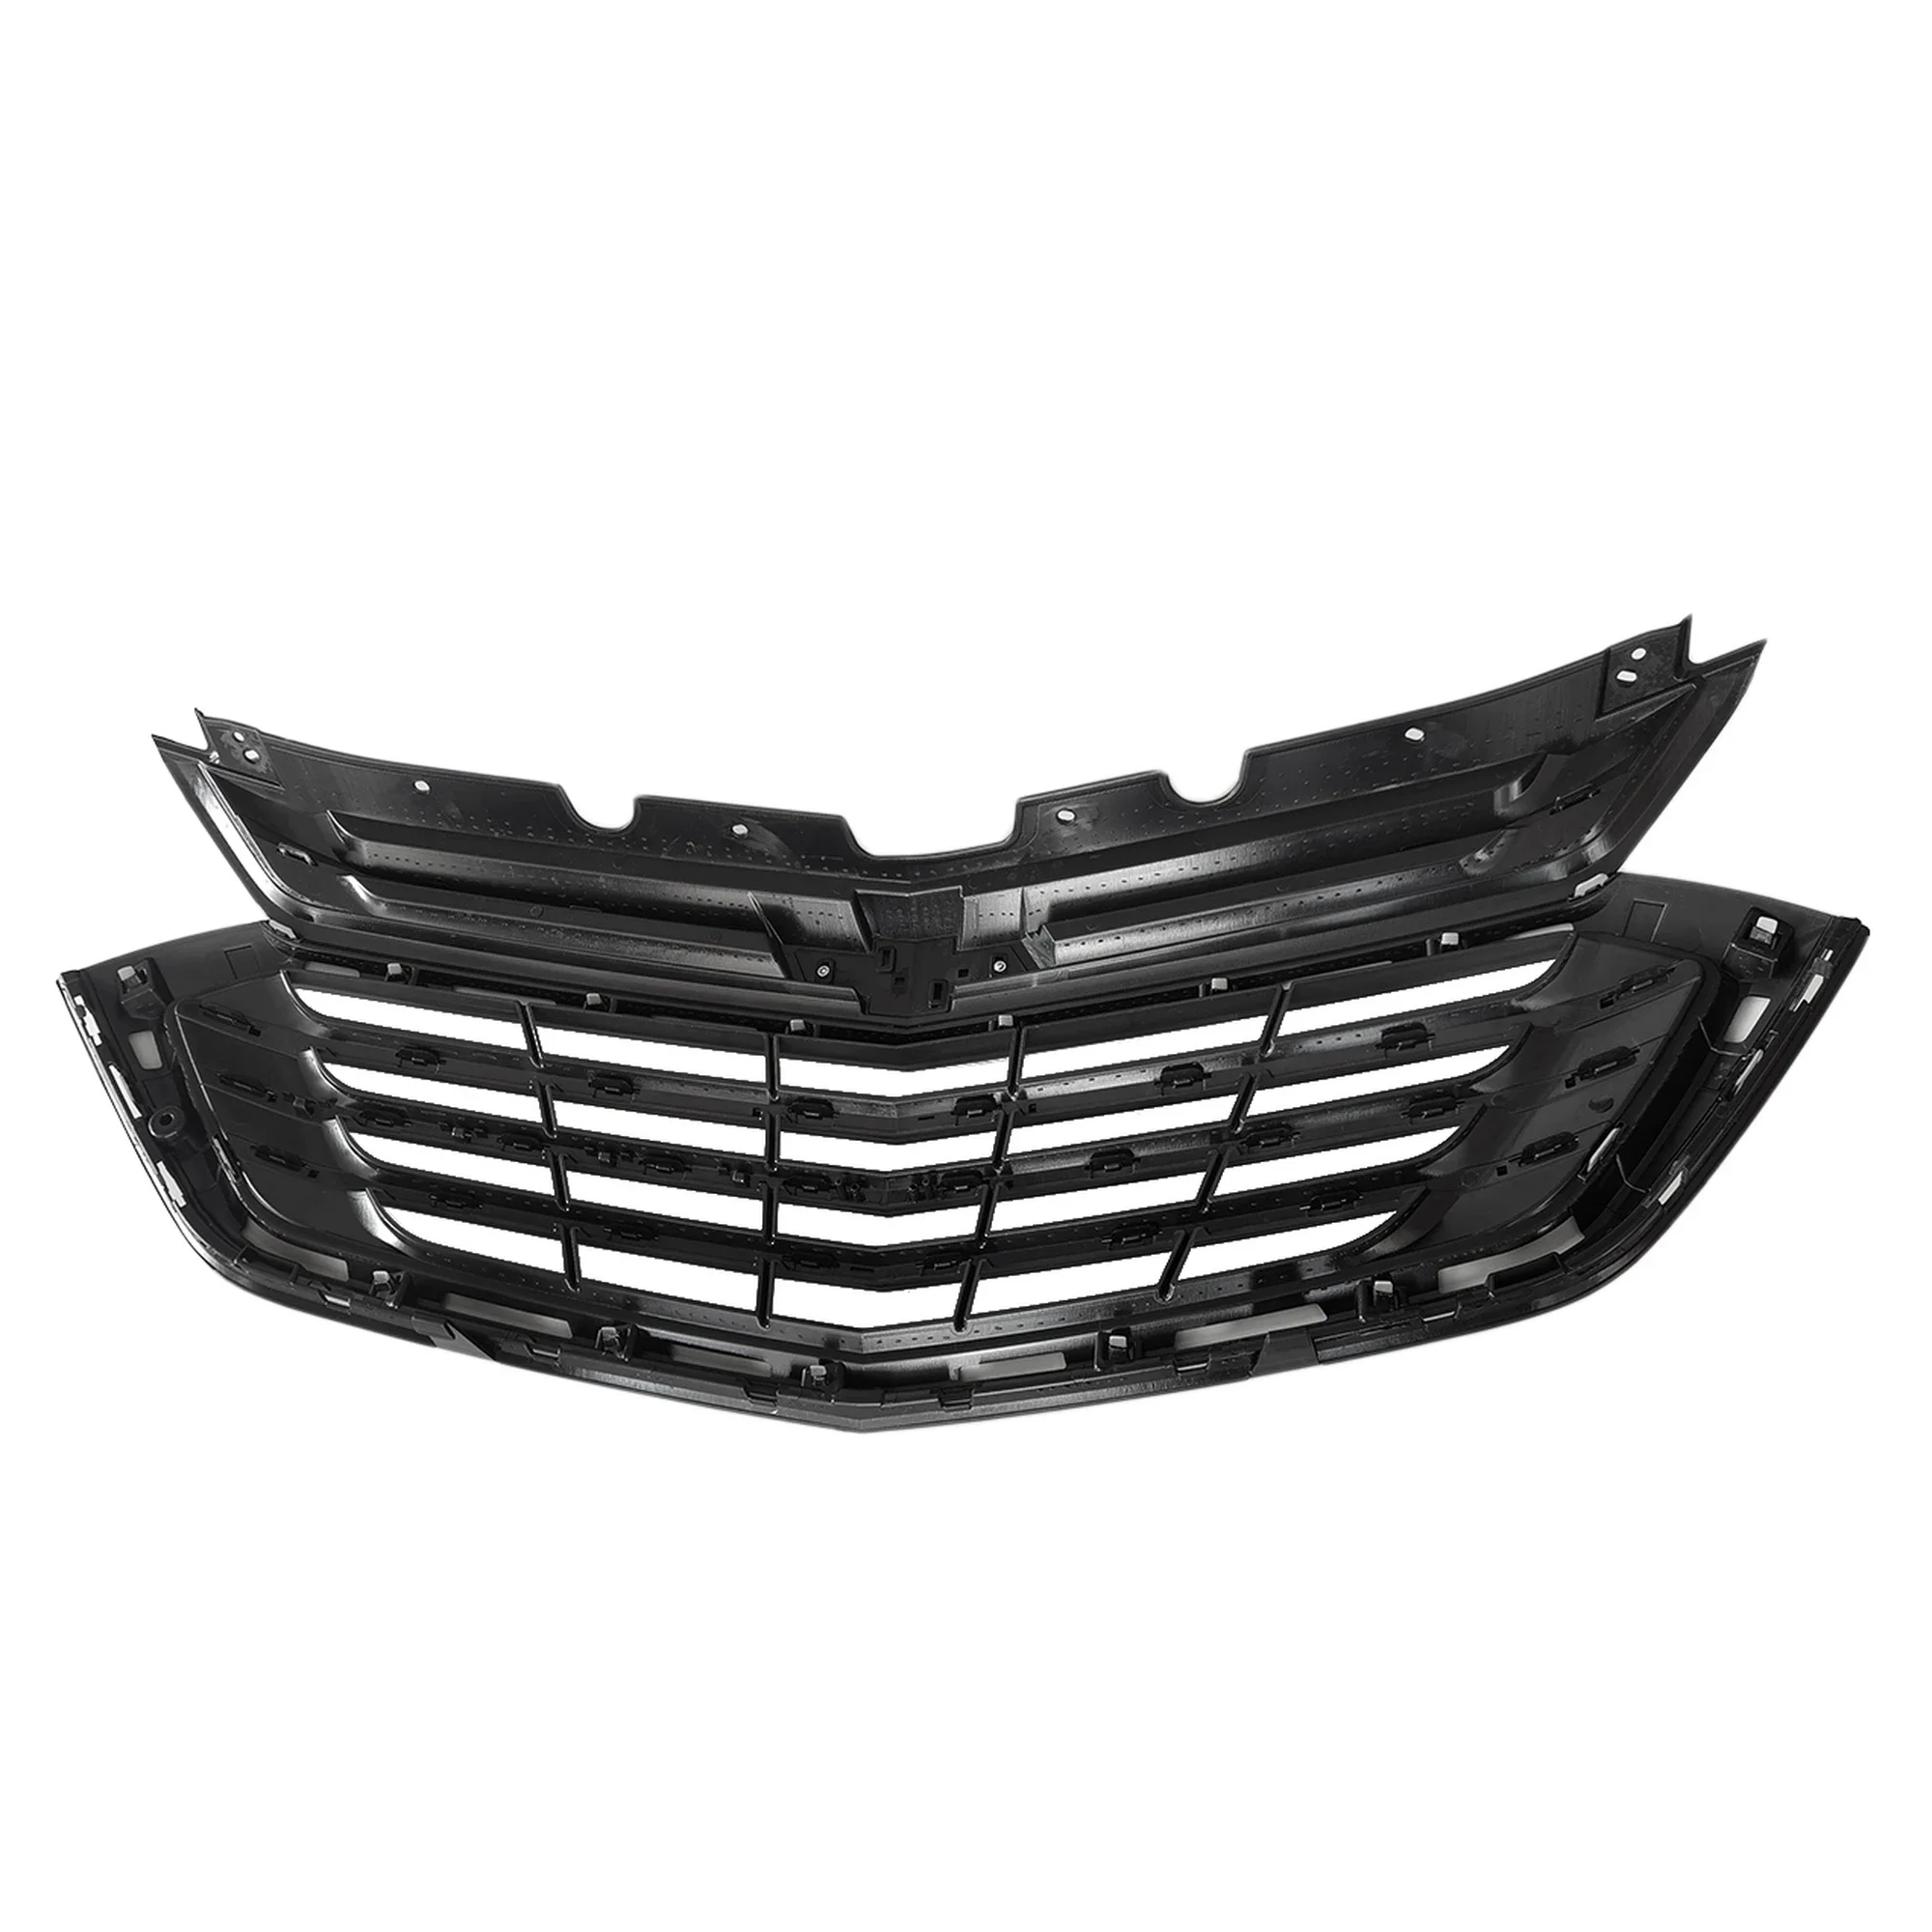 

US Free Shipping Home Front Upper Glossy Black Bumper Car Grille for 2018 2019 2020 Chevrolet Equinox